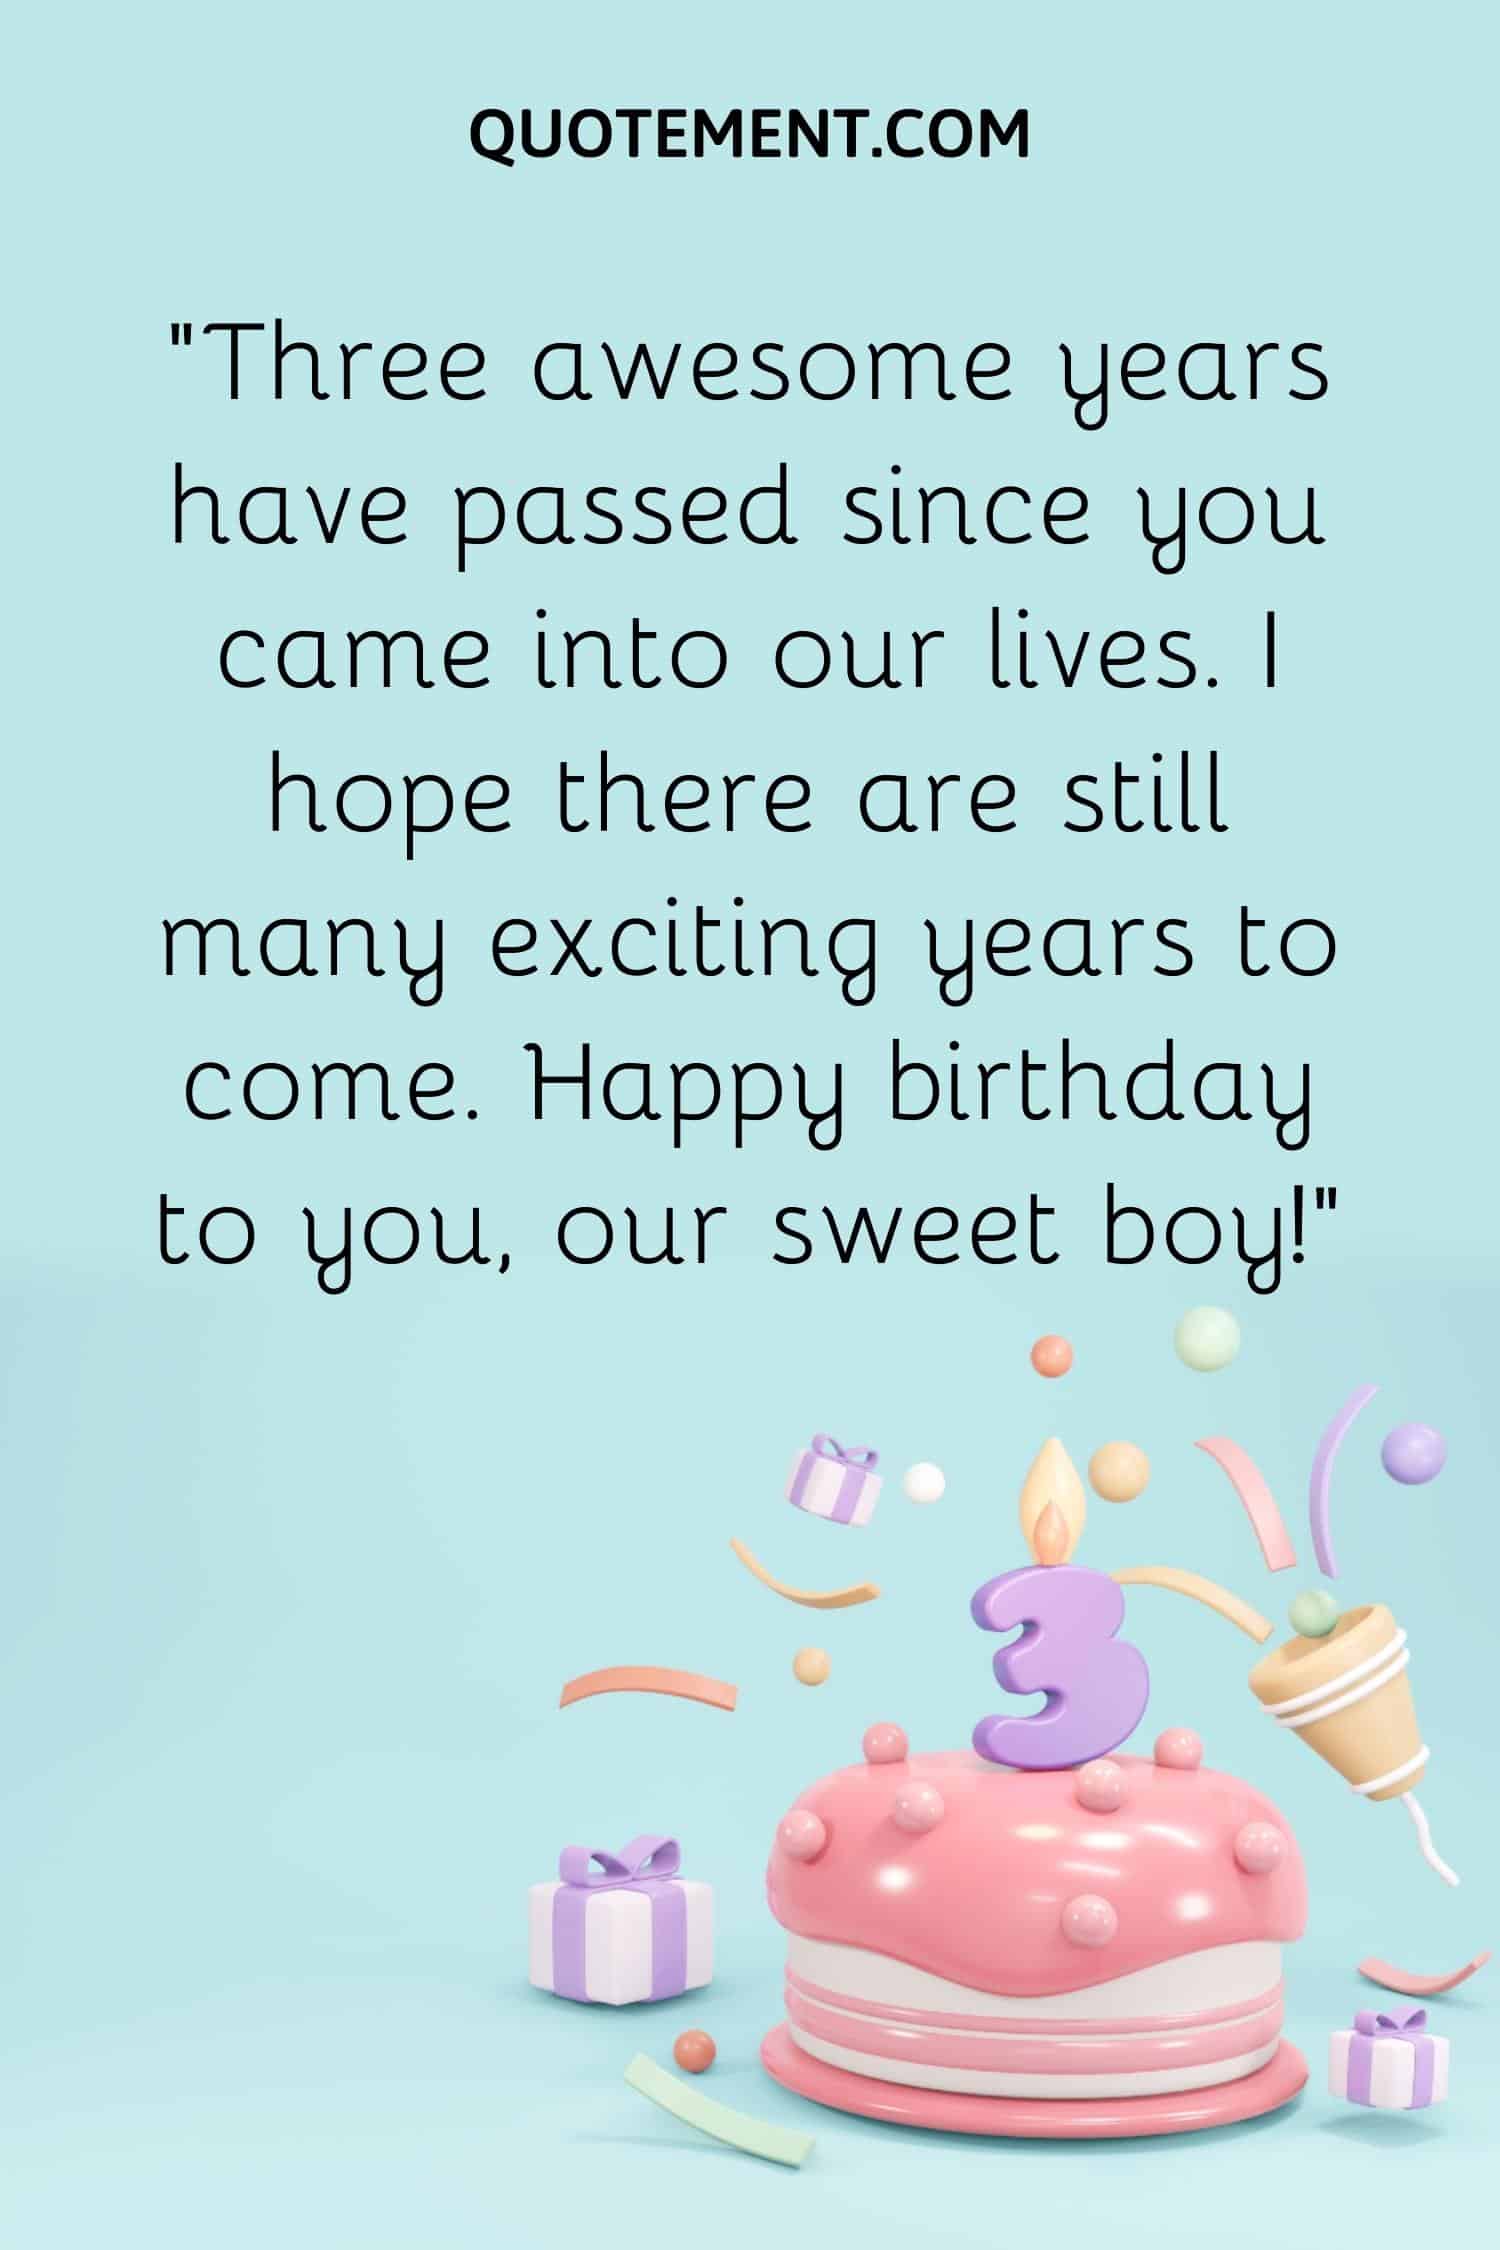 “Three awesome years have passed since you came into our lives. I hope there are still many exciting years to come. Happy birthday to you, our sweet boy!”